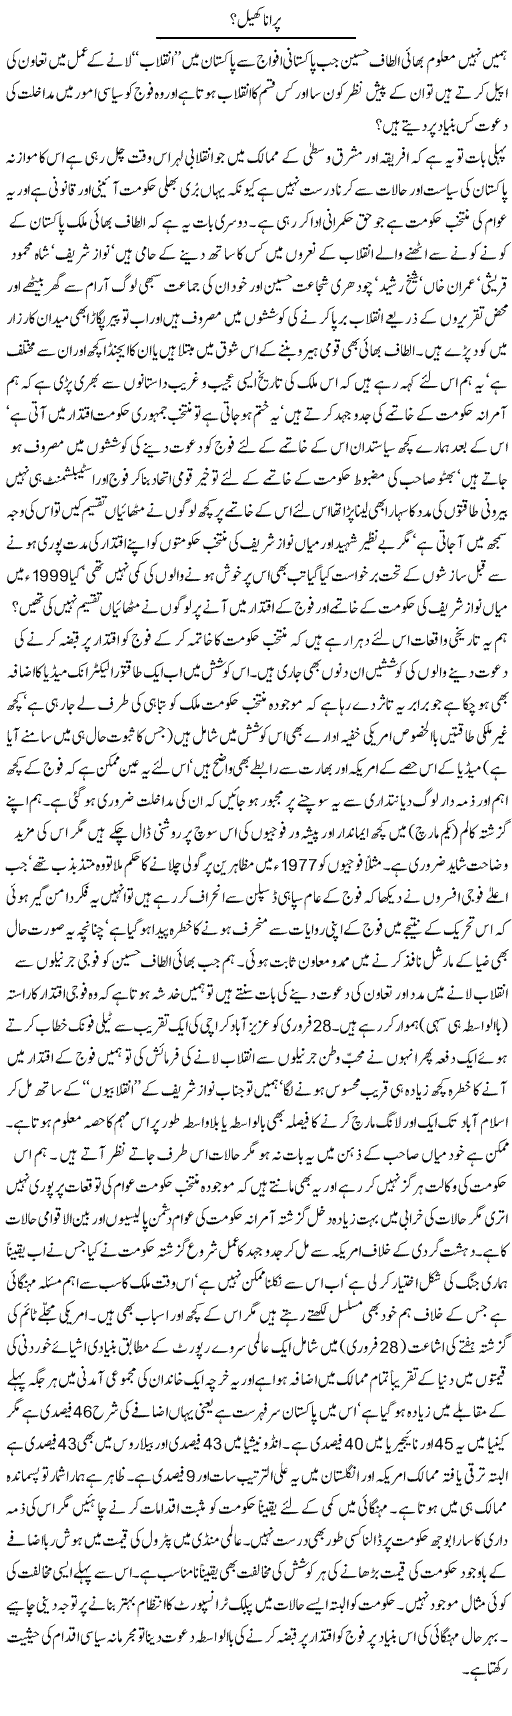 Army In Pakistan Express Column Hameed Akhtar 3 March 2011